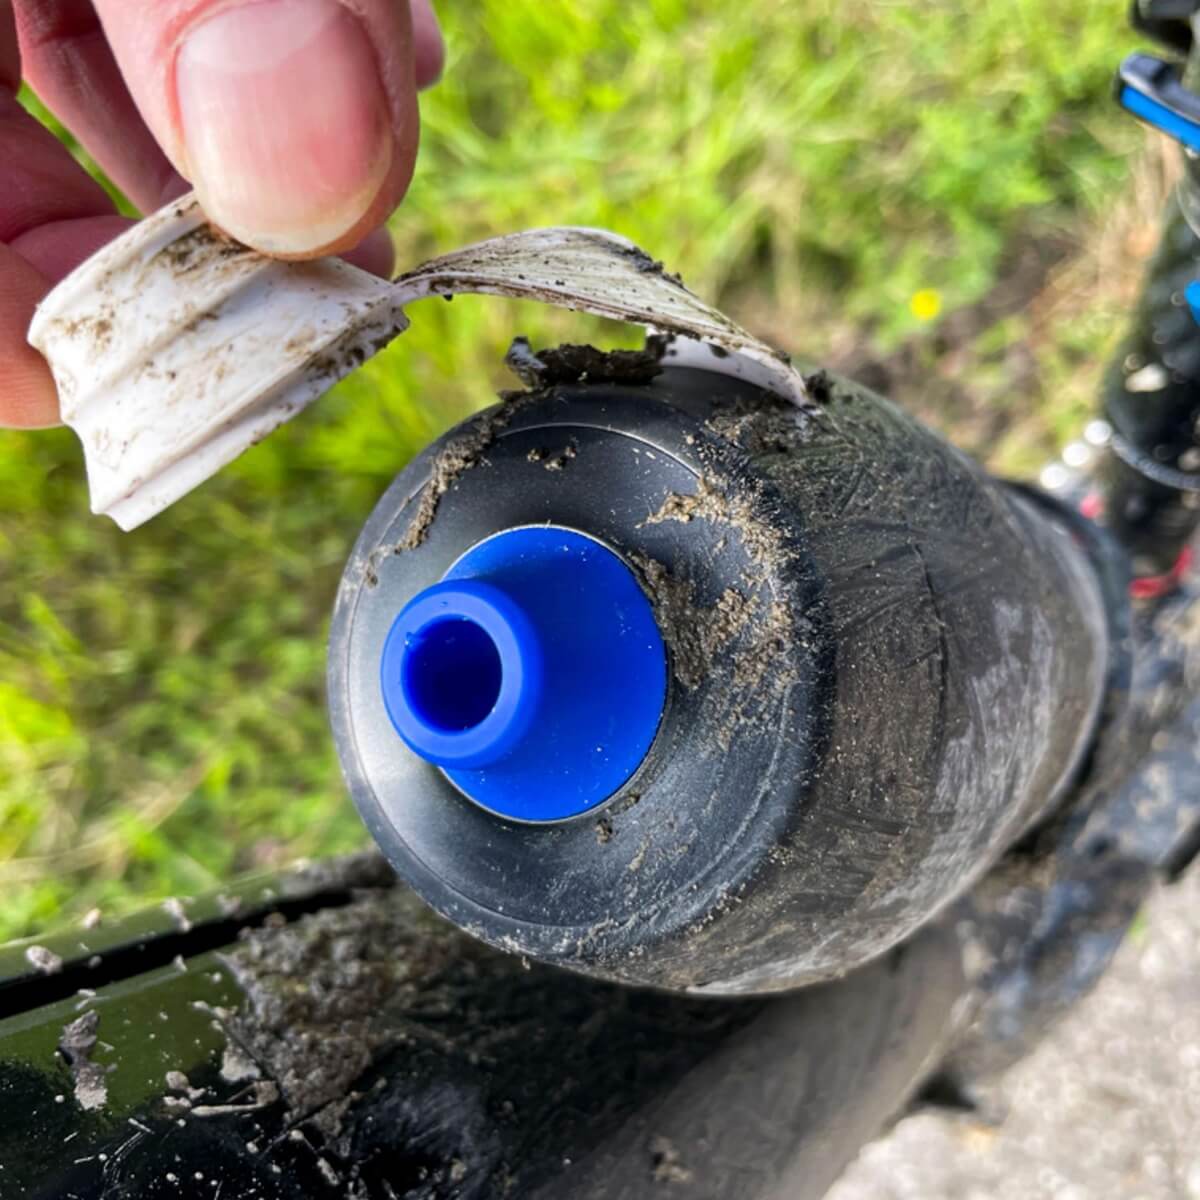 A cyclist has opened the dust cap of a bottle smeared with mud, but the mouthpiece is clean